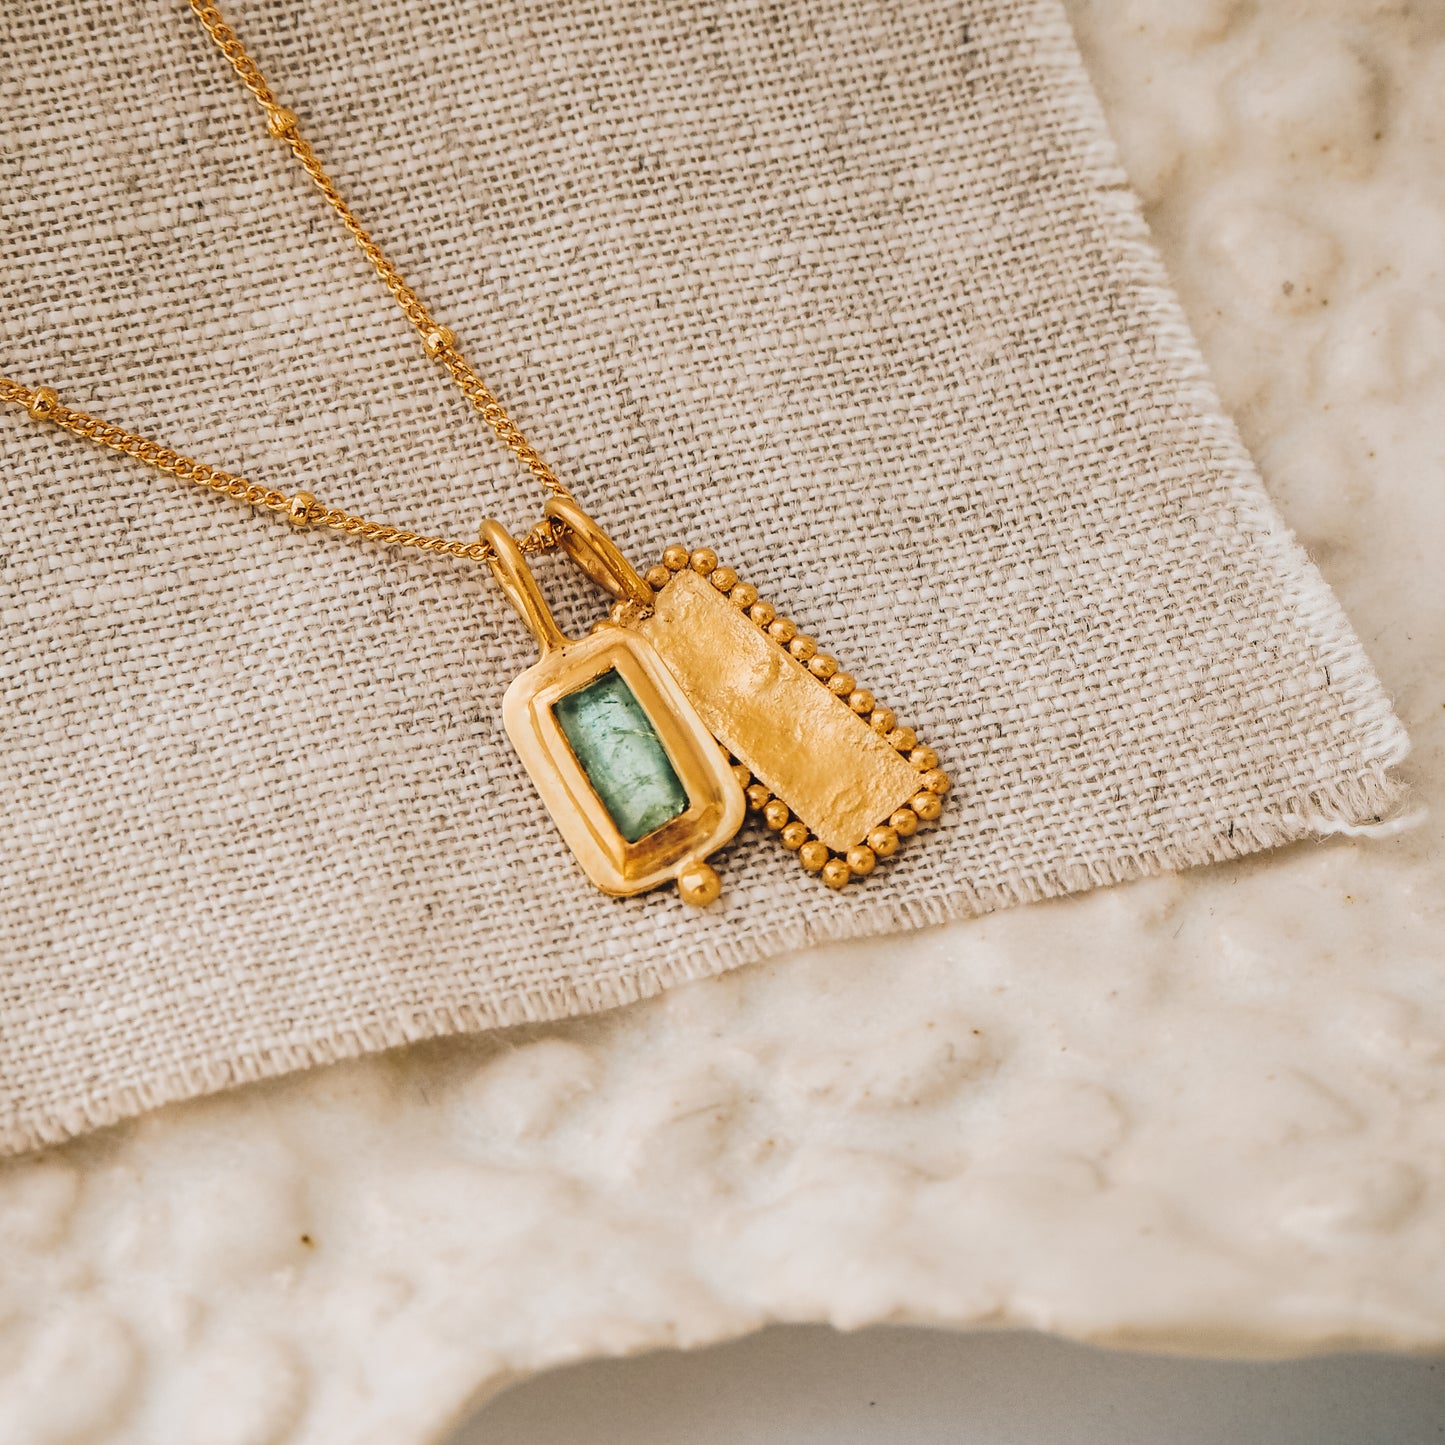 Square gold pendant showcasing a stunning blue rose cut tourmaline gemstone and meticulous granulation work, gracefully suspended from a delicate satellite chain.